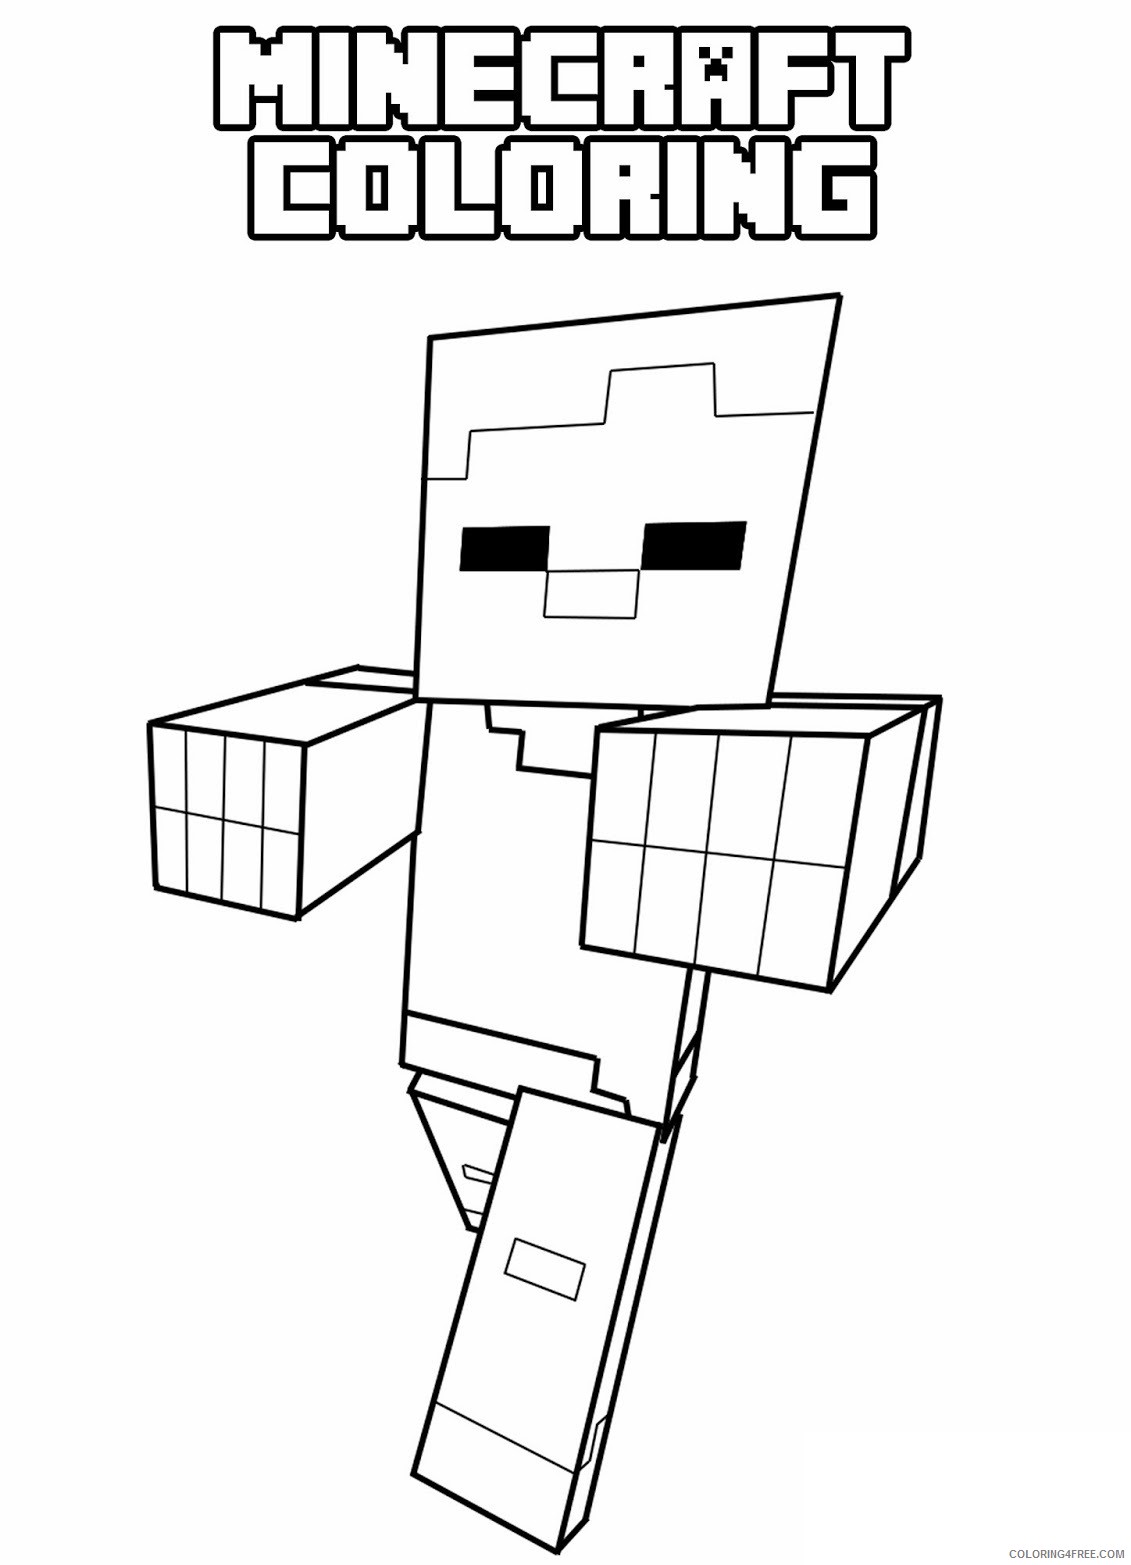 minecraft coloring pages free to print Coloring4free